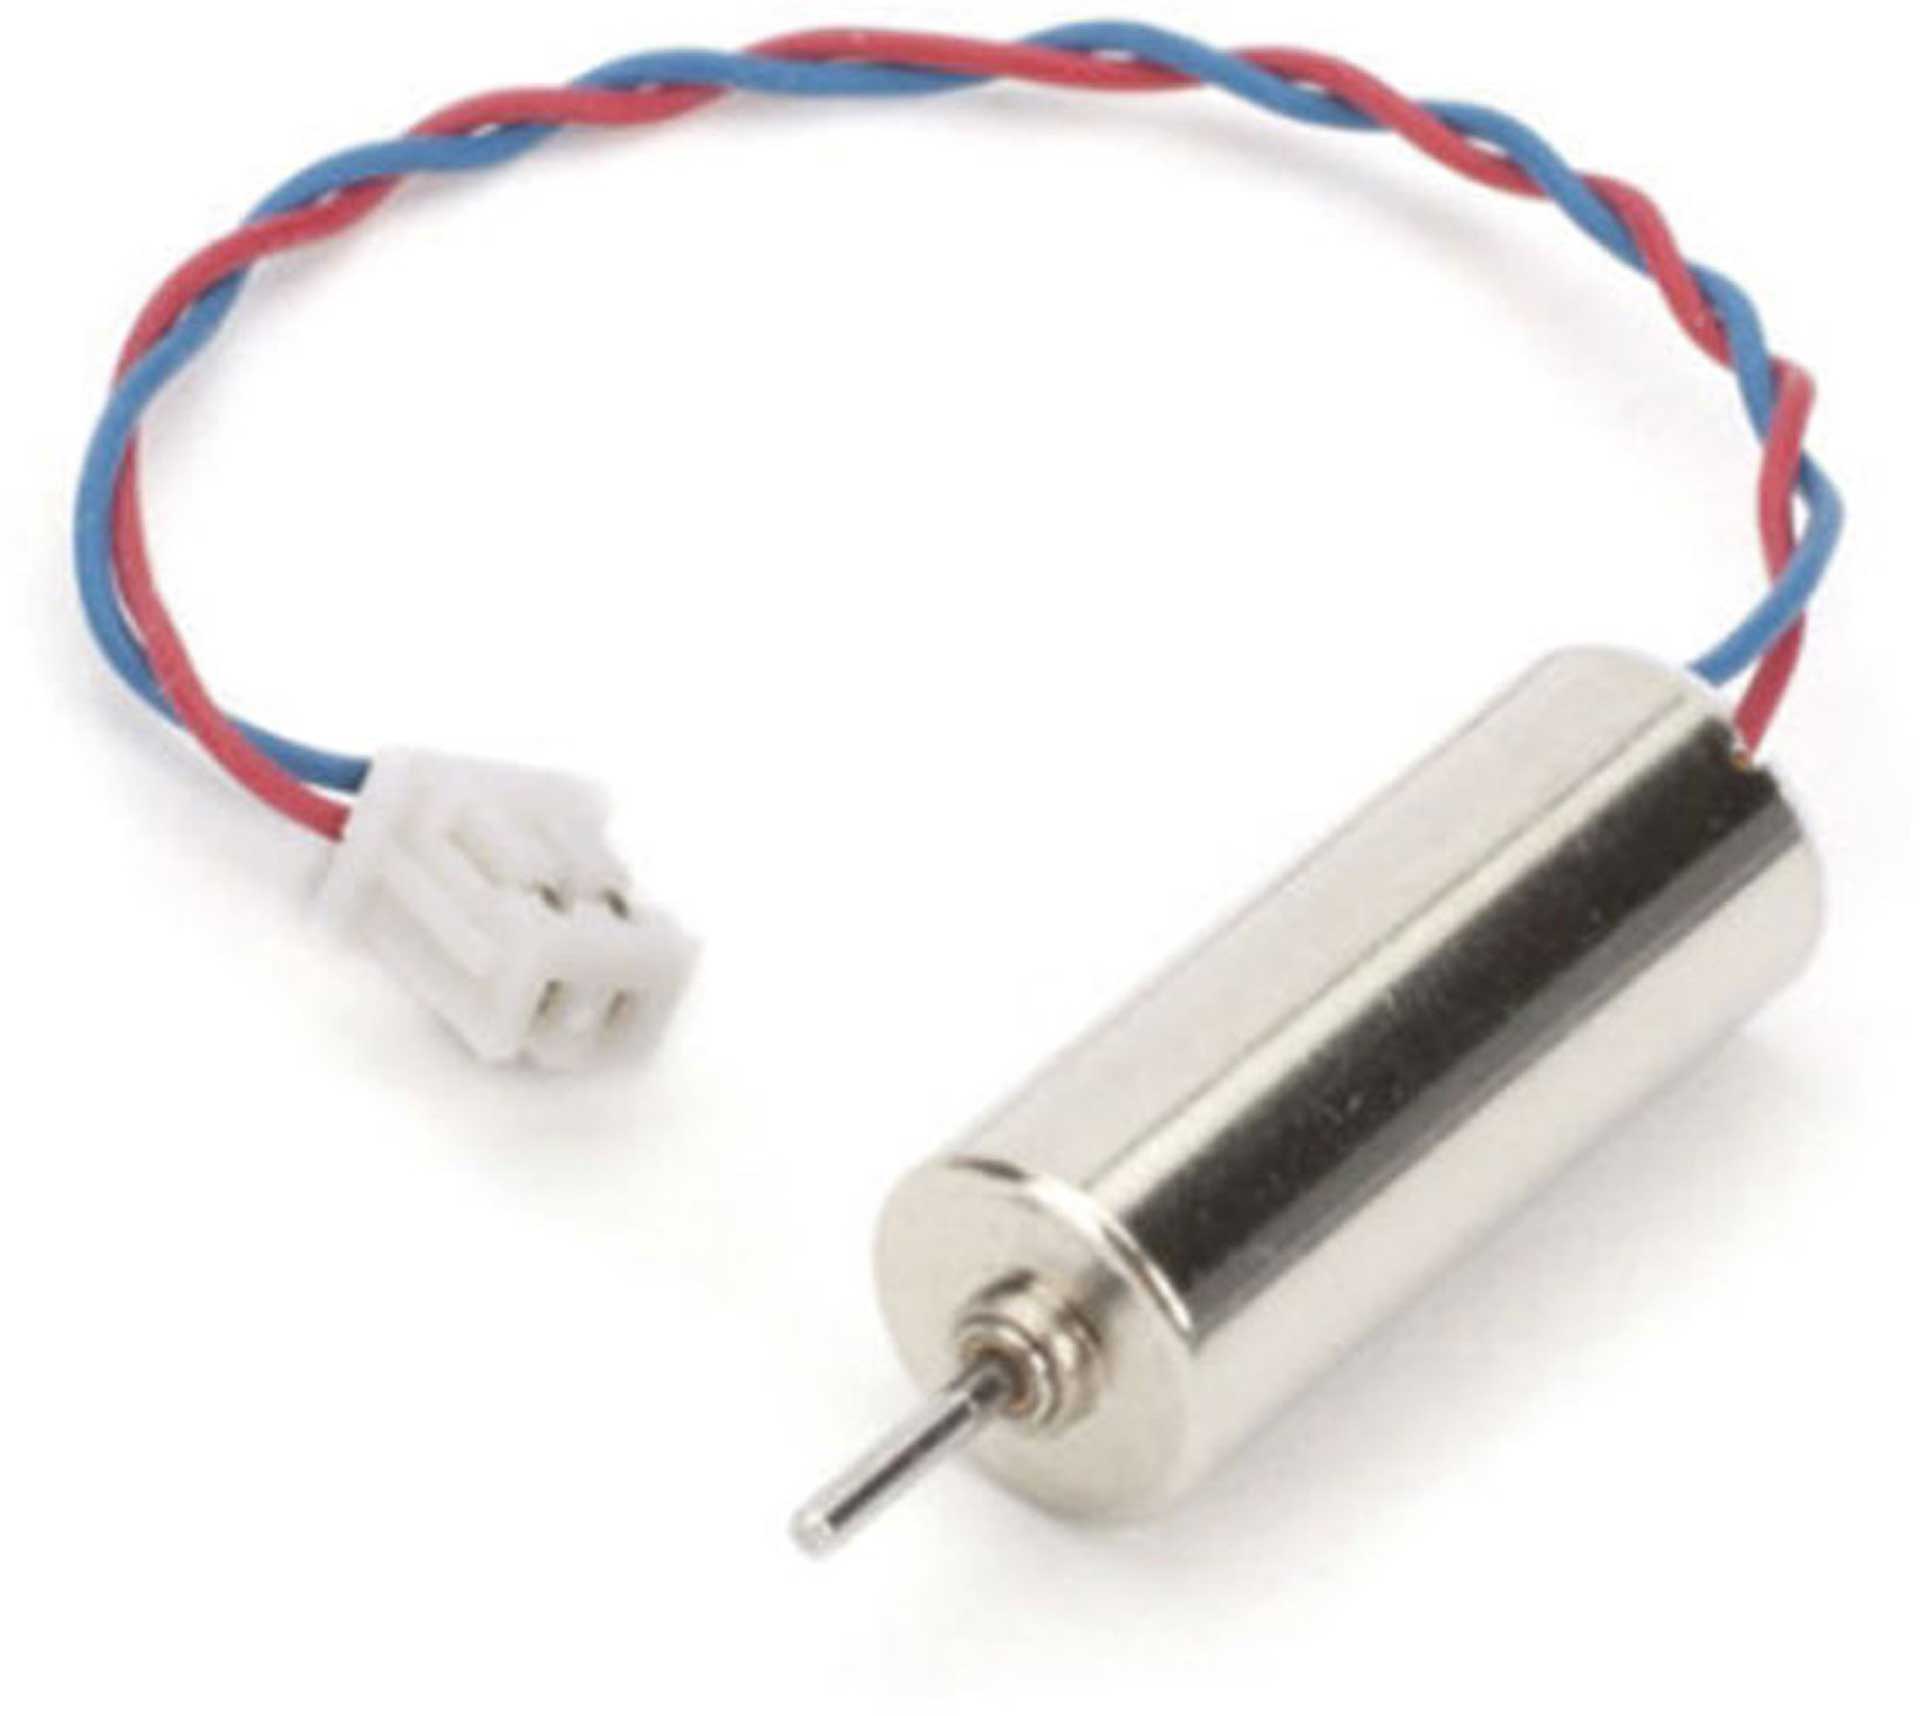 BLADE (E-FLITE) TURN MOTOR WITH CABLE LEFT QX NANO